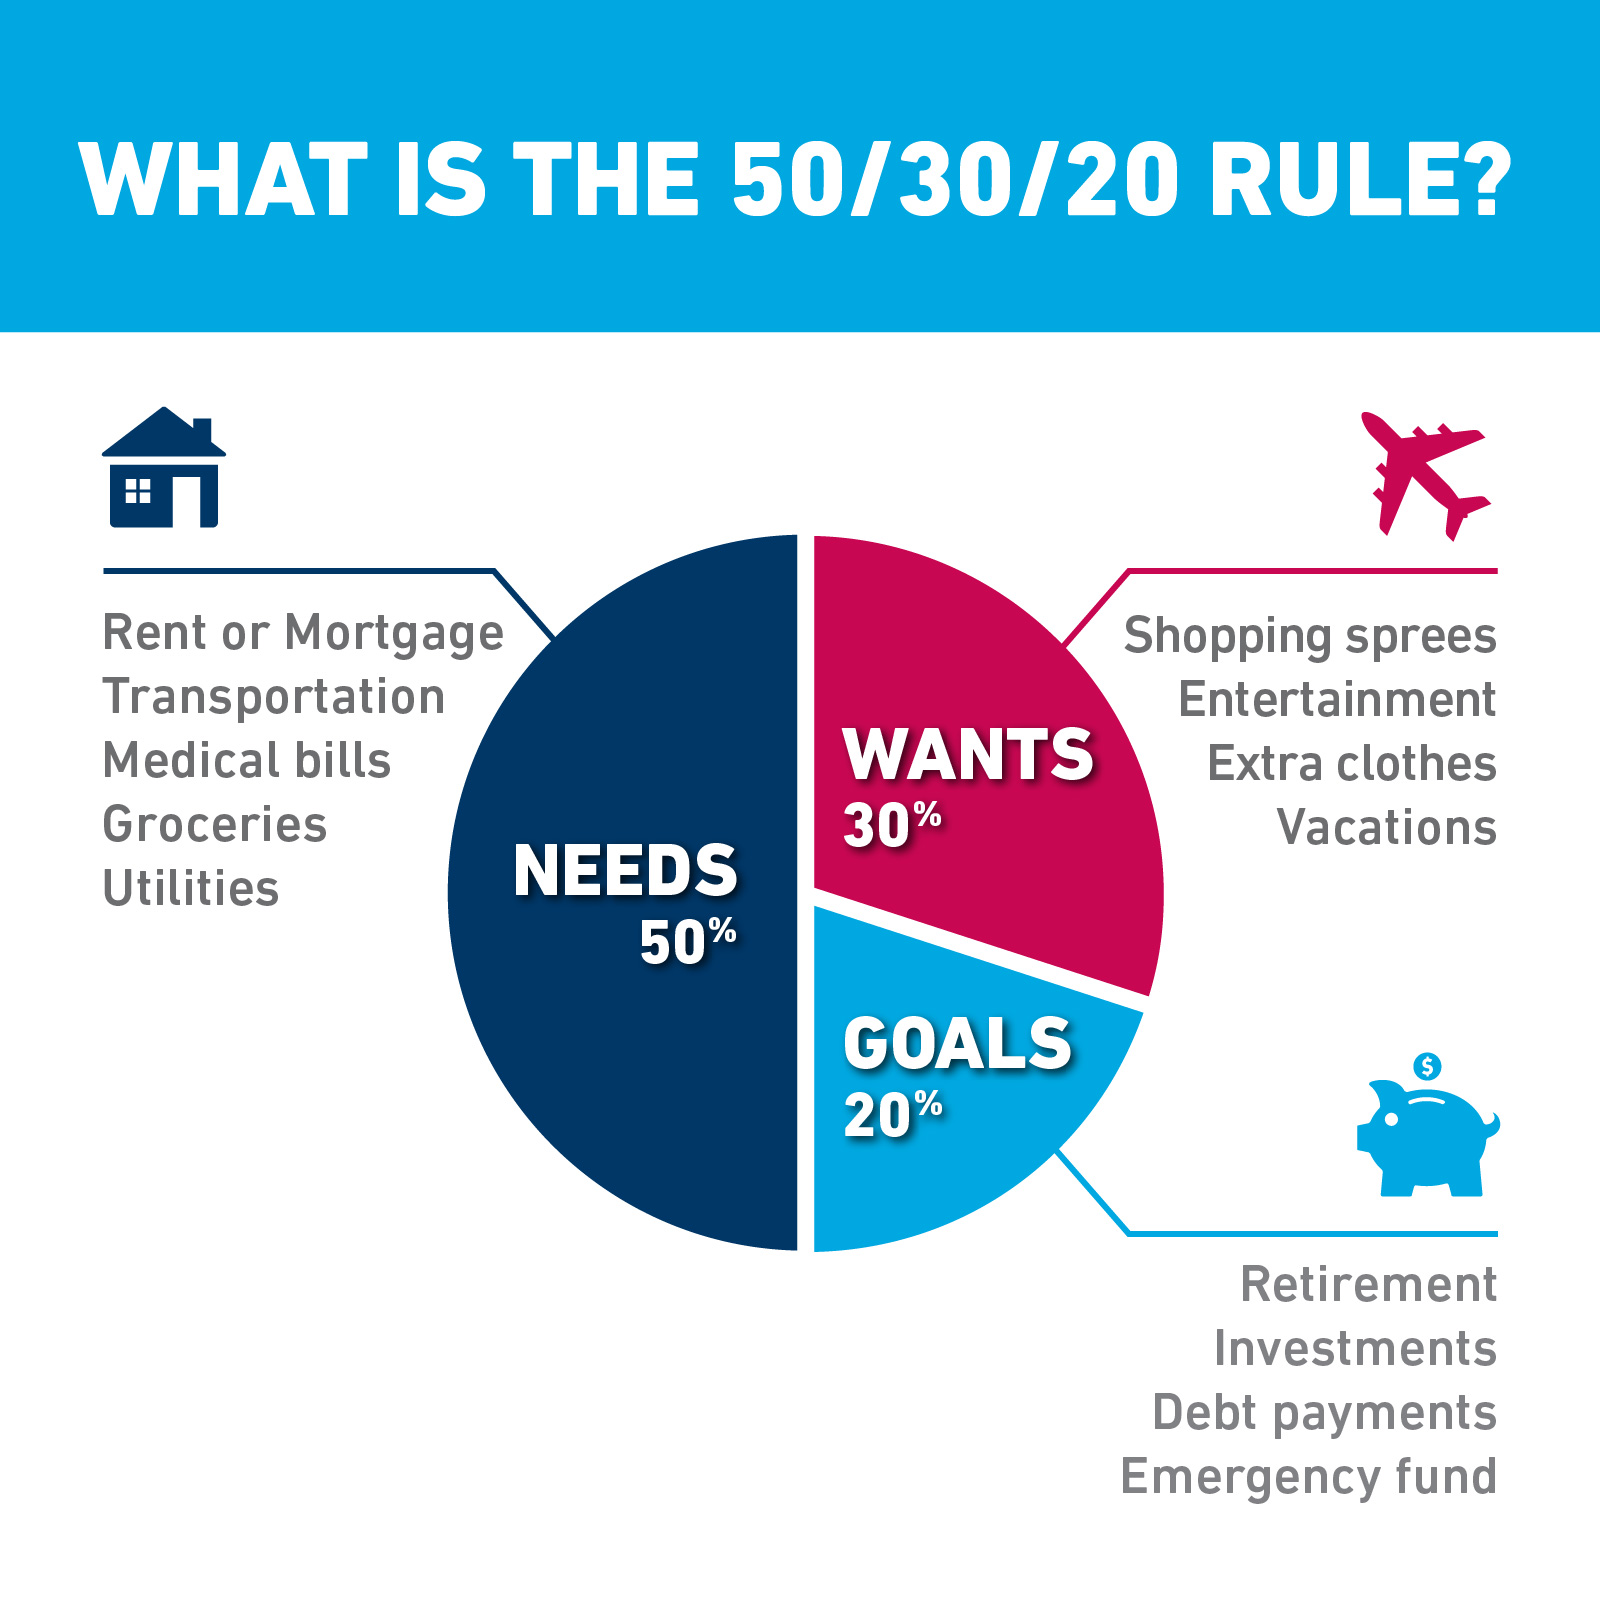 What is the 50/30/20 rule? A budget that allocates 50% towards needs, 30% towards wants and 20% towards goals.